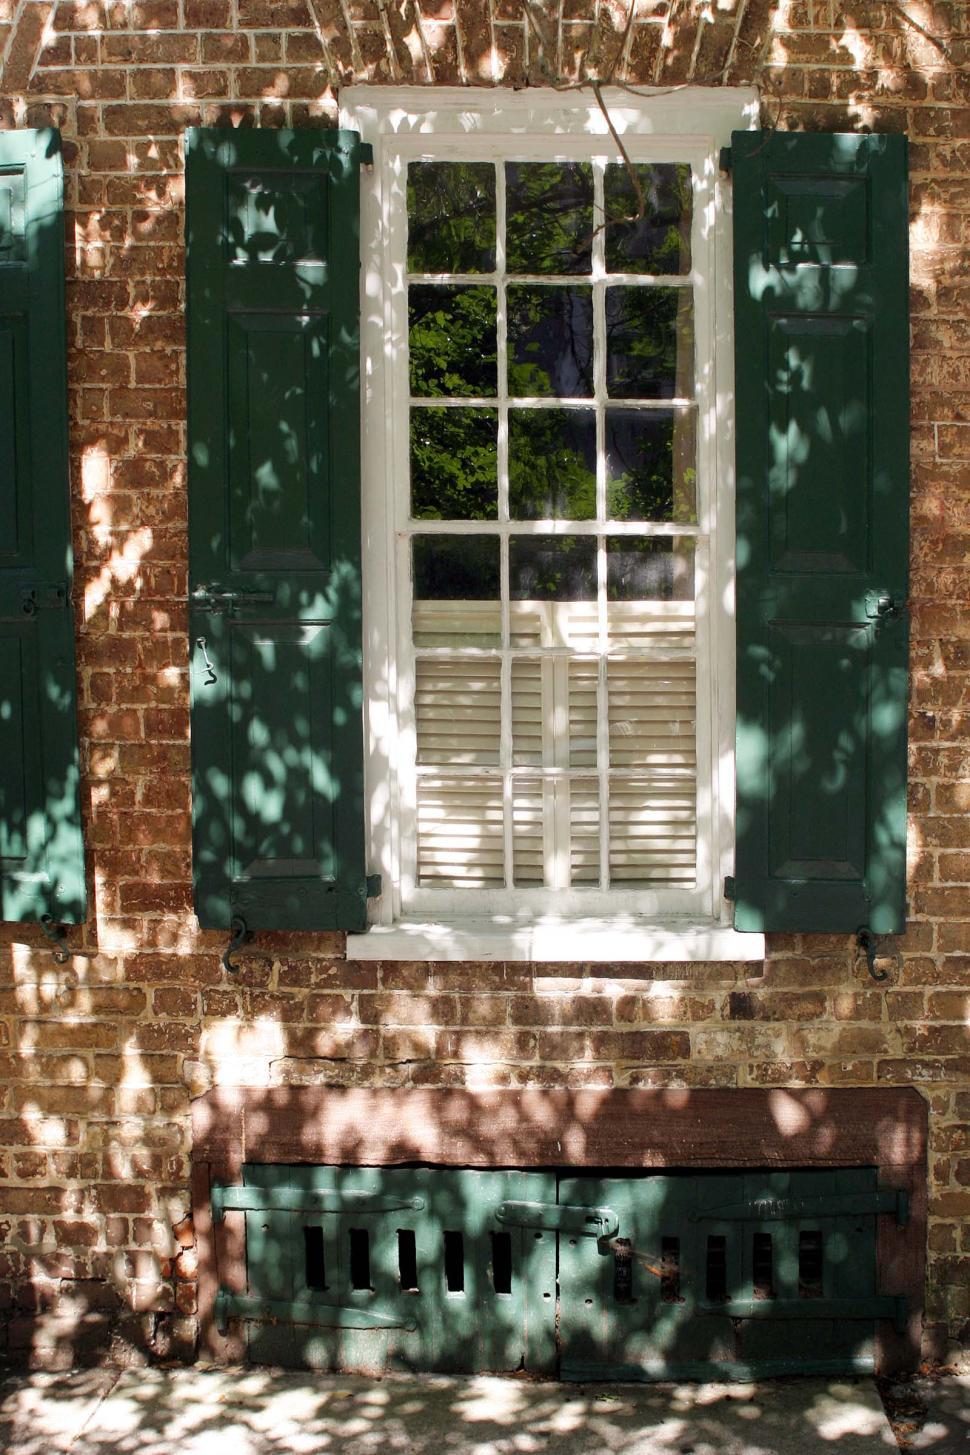 Free Image of Brick Building With Green Shutters and Bench 